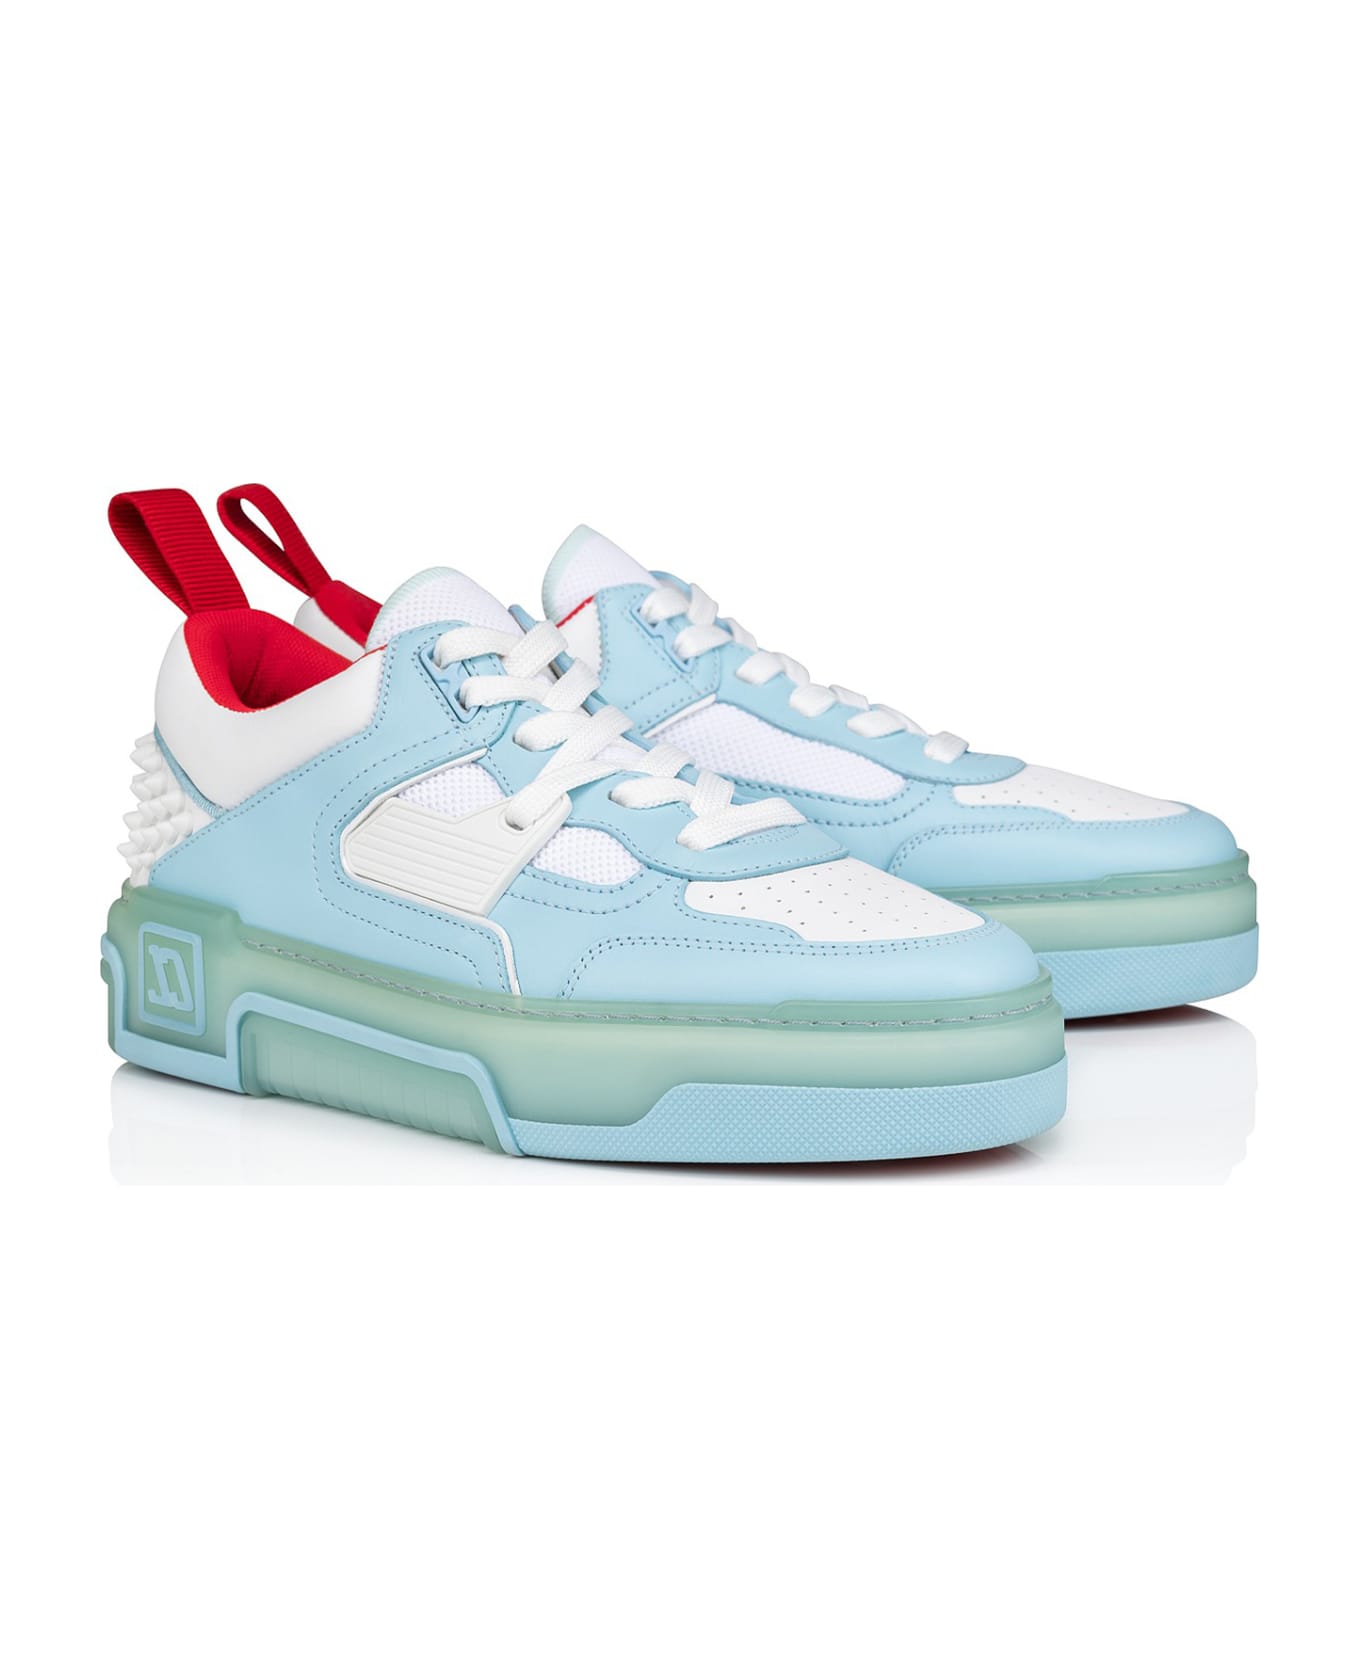 Christian Louboutin Astroloubi Woman Sneakers In Leather - MINERAL/WHITE